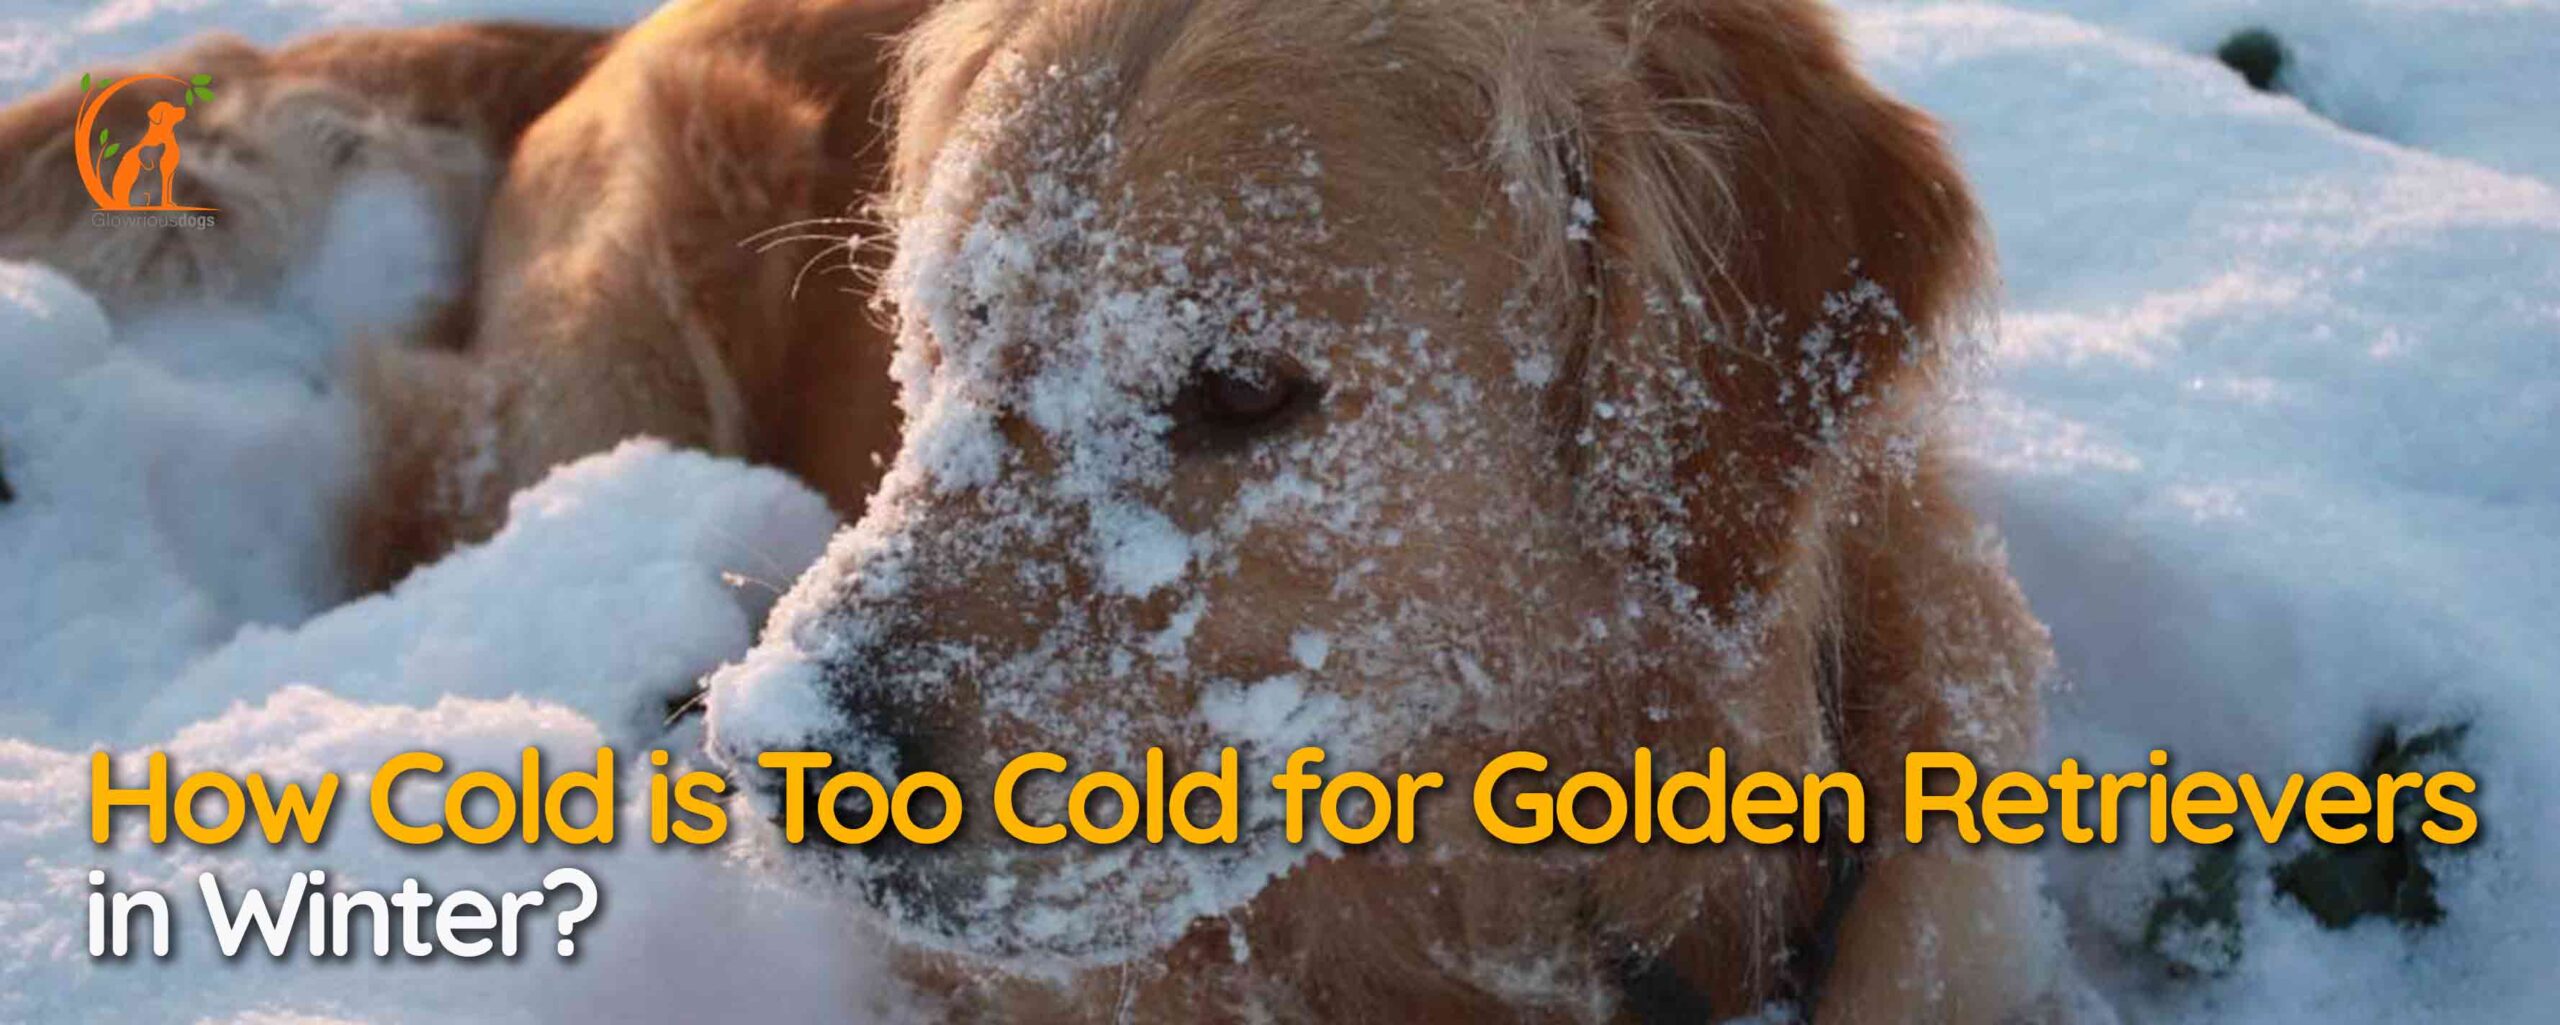 How Cold is Too Cold for Golden Retrievers in Winter?